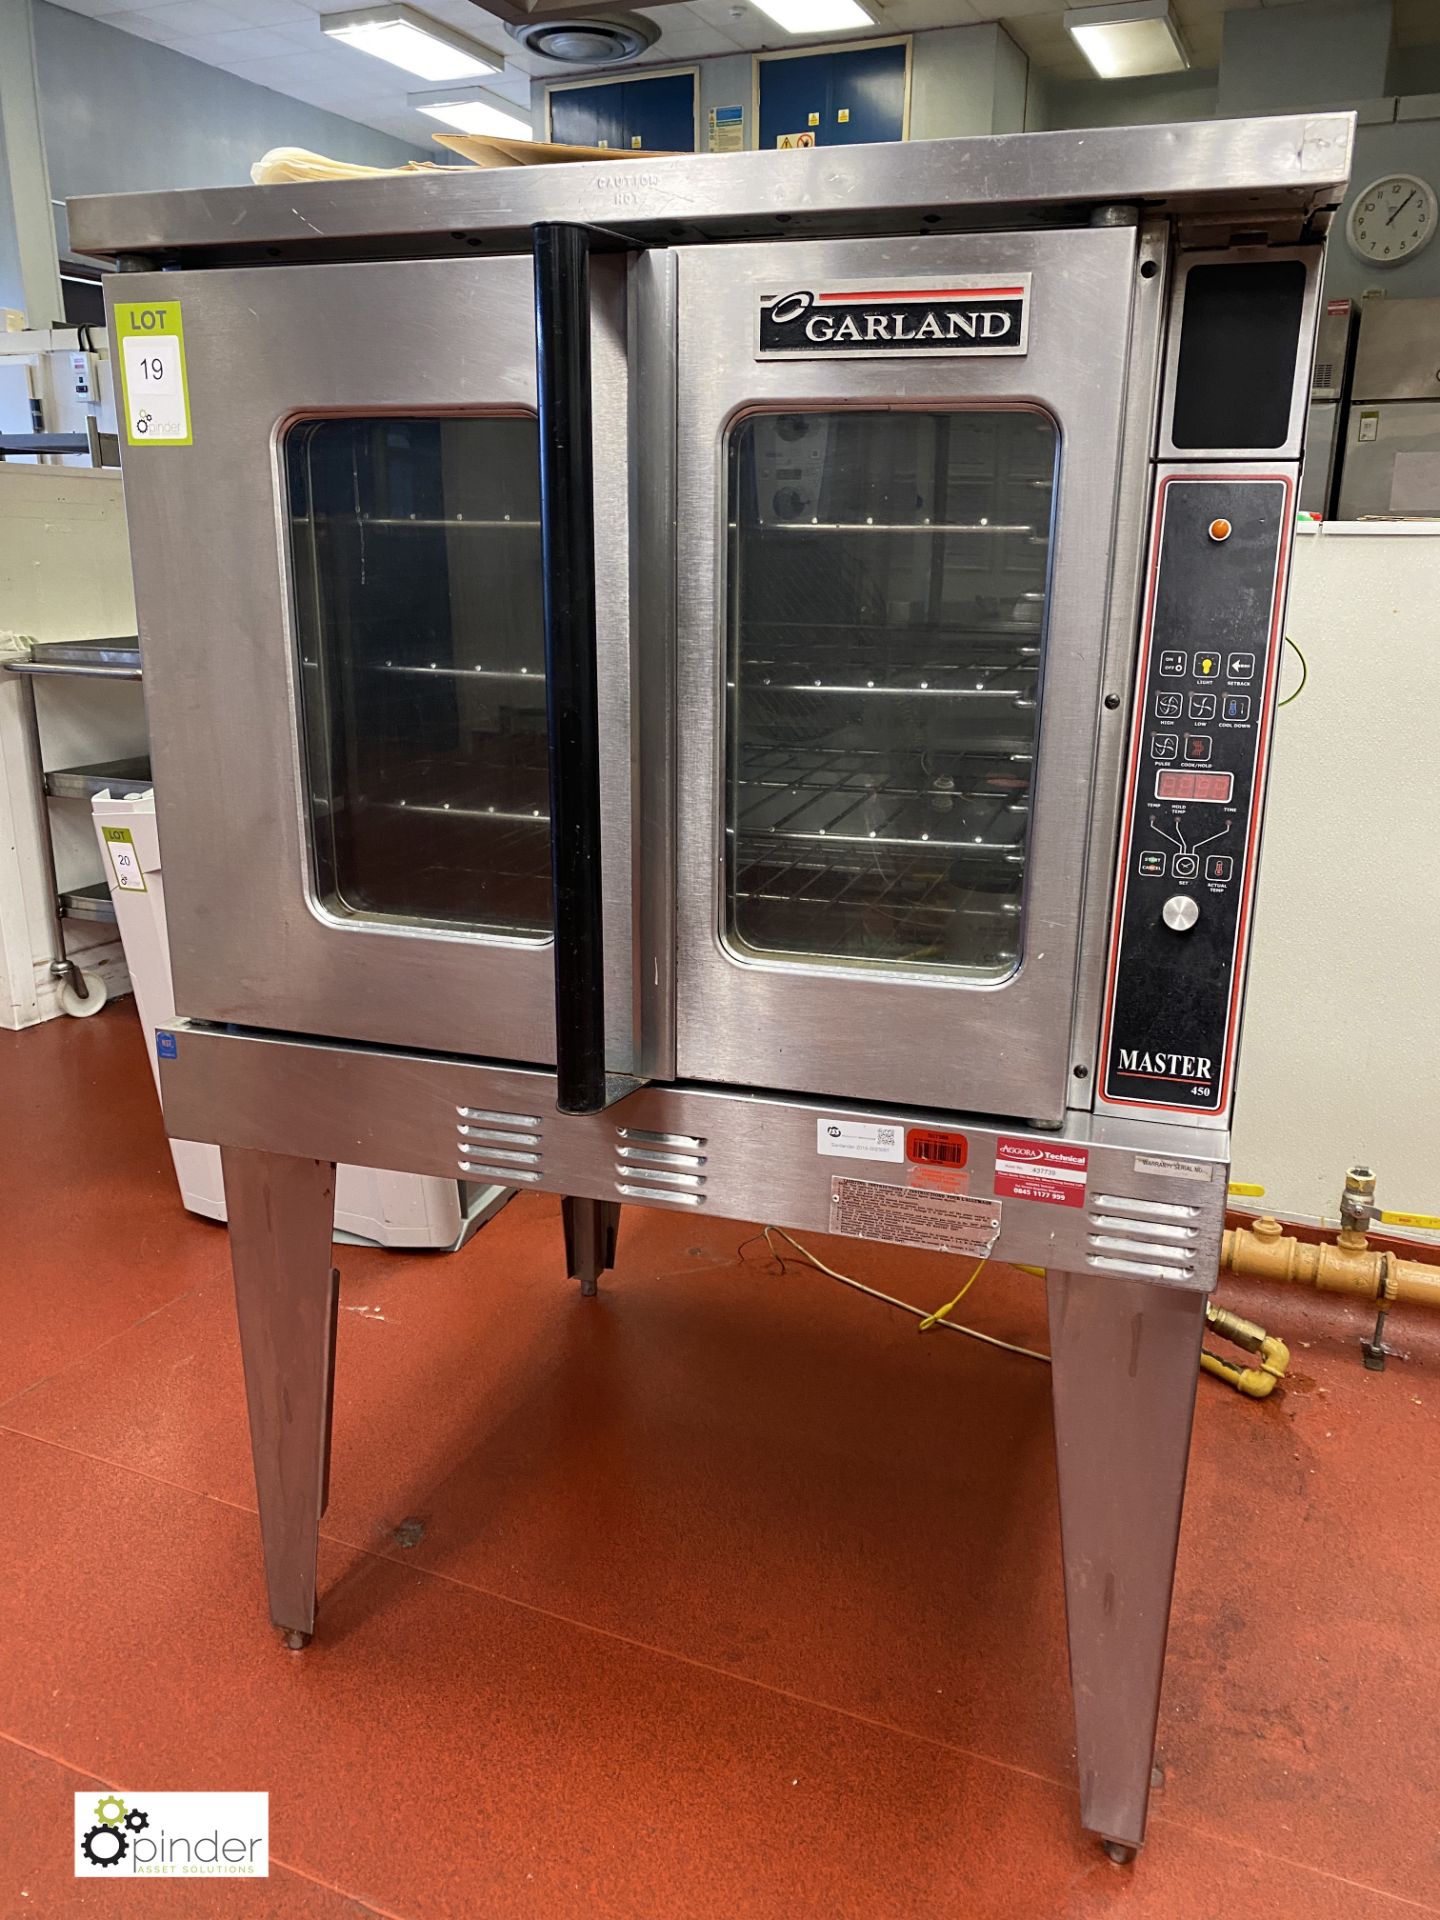 Garland Master 450 gas fired Convection Oven, 970mm x 970mm x 1460mm (lot location – Parkview - Image 2 of 7